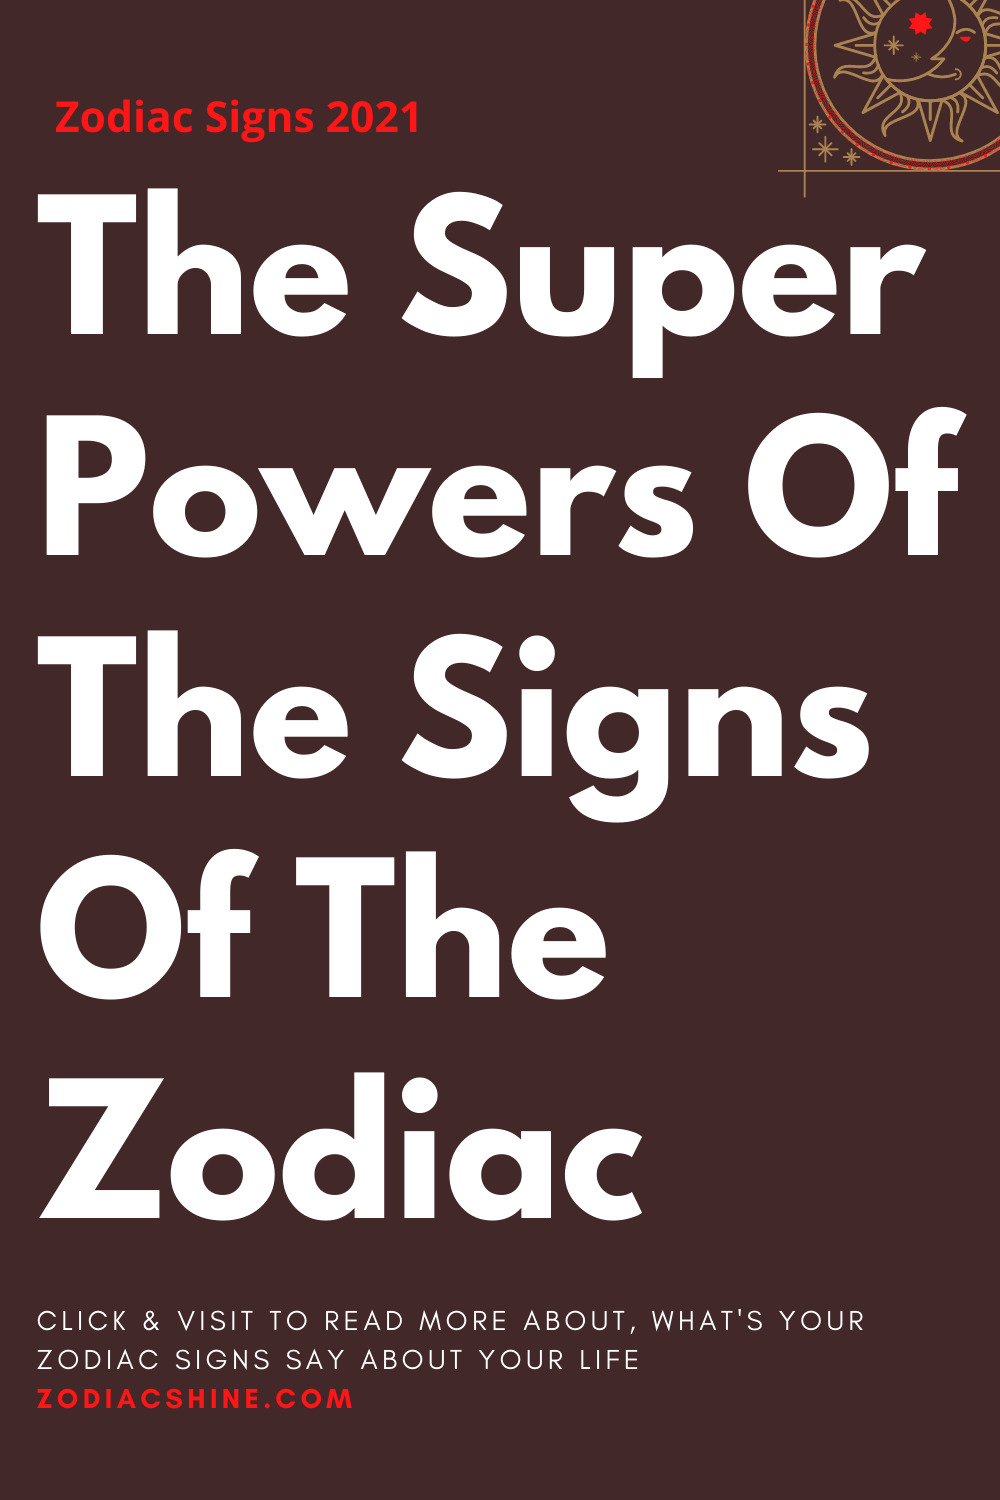 The Super Powers Of The Signs Of The Zodiac